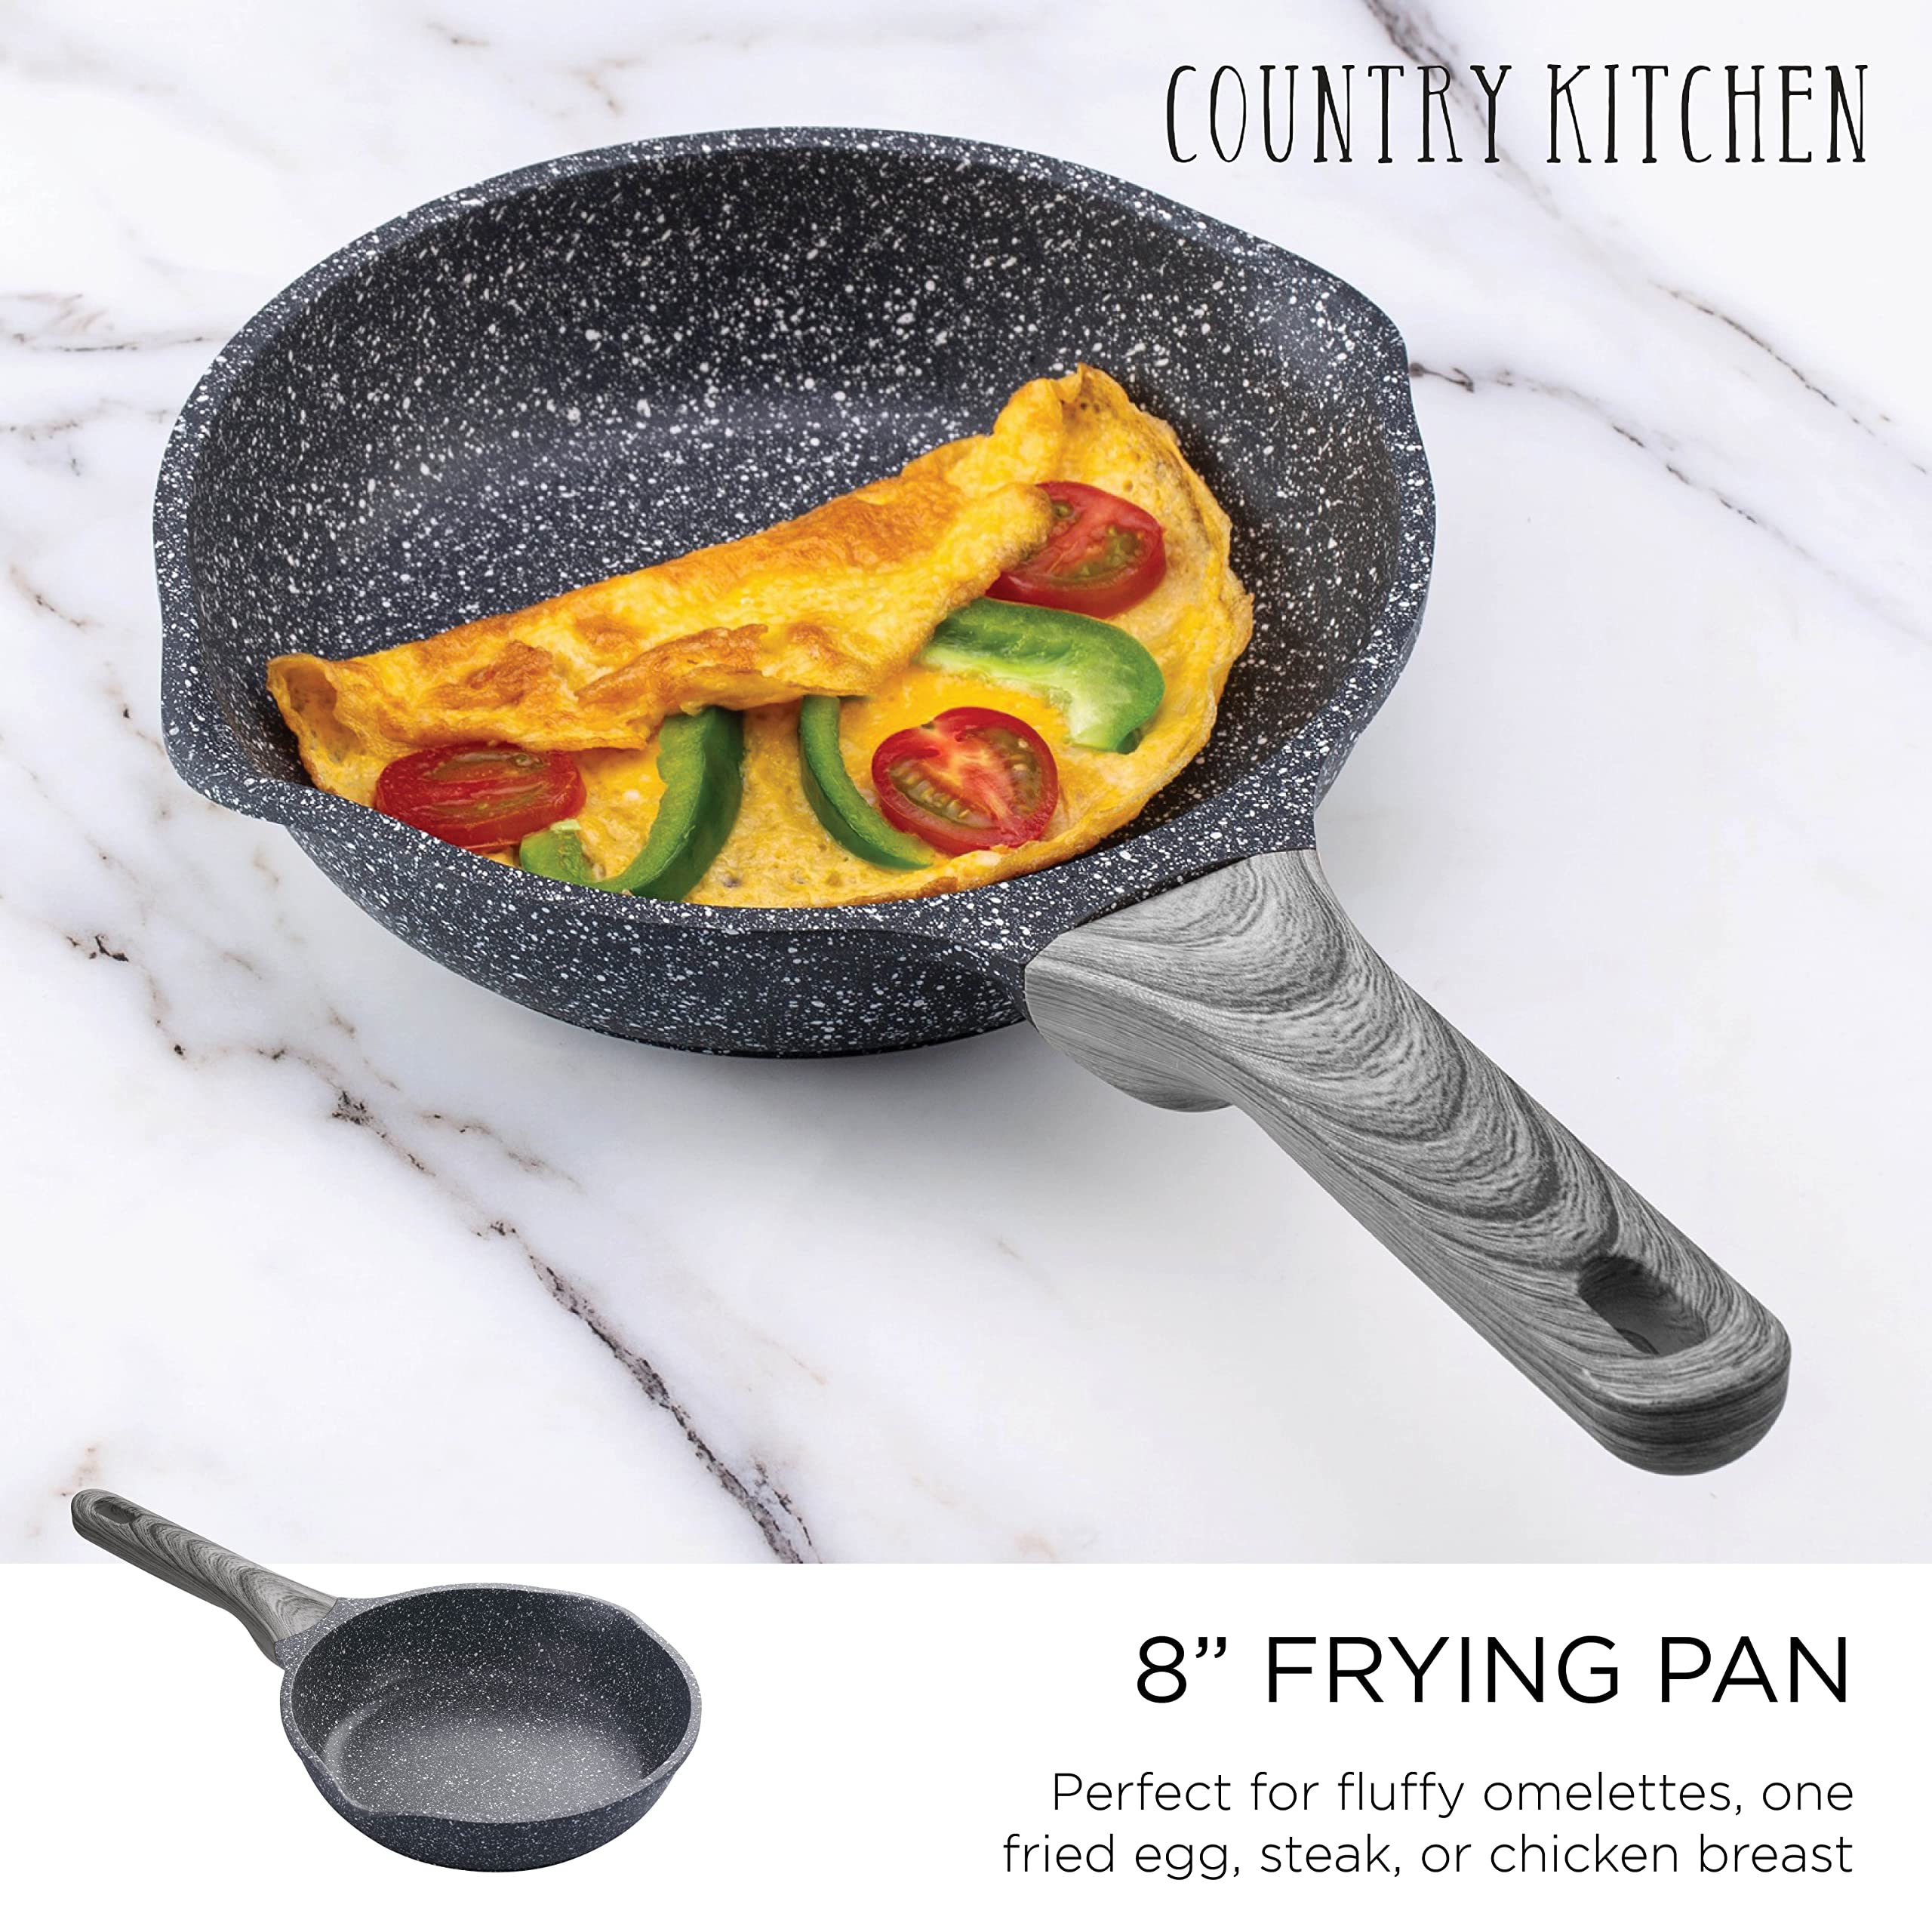  Country Kitchen Nonstick Induction Cookware Sets - 8